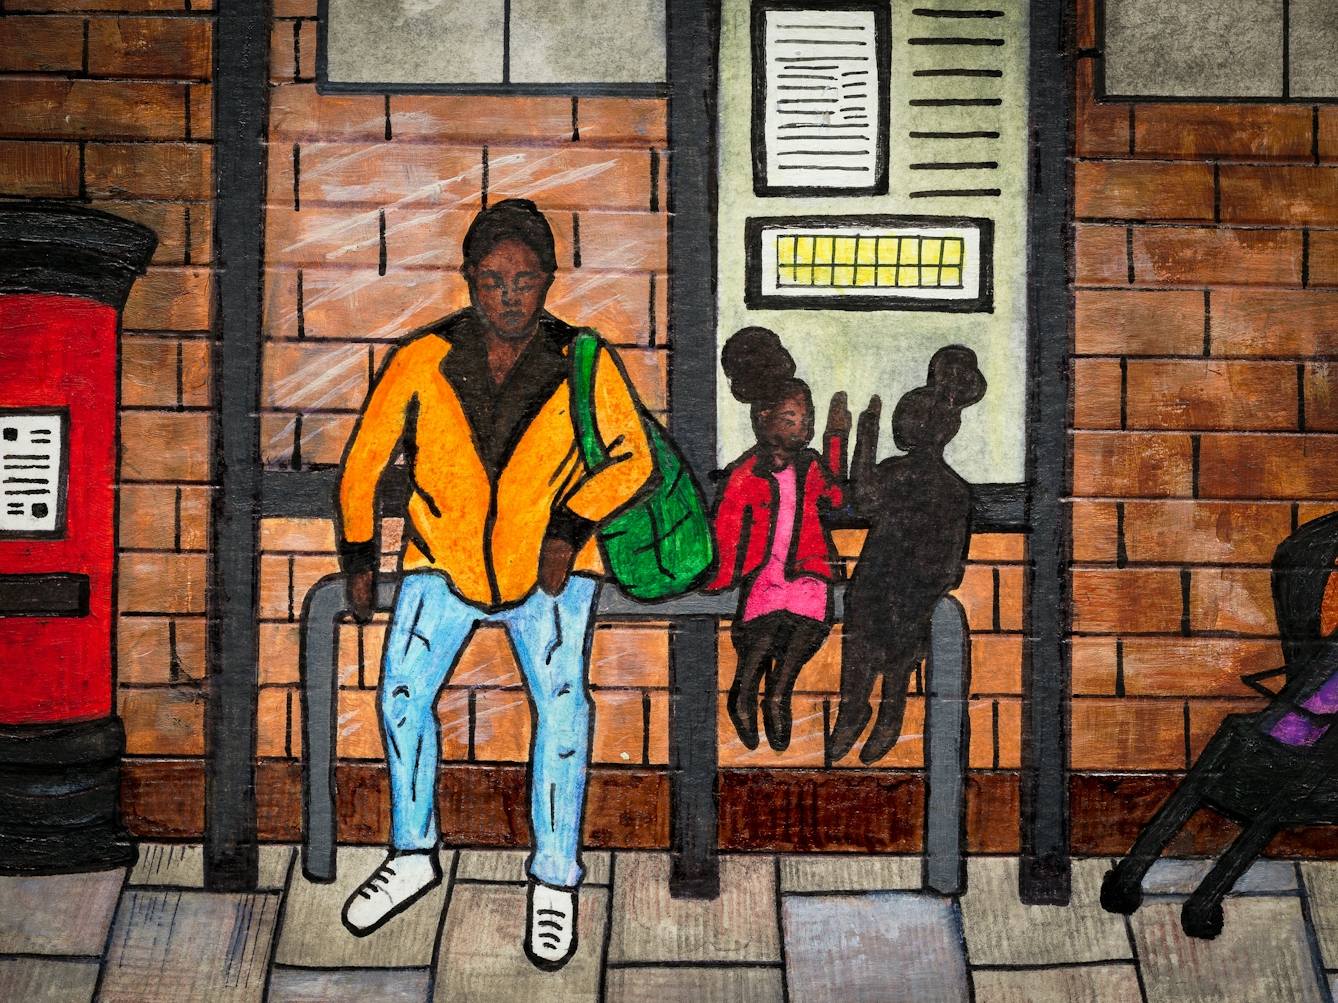 Detail from larger artwork made with paint and ink on textured watercolour paper. The artwork shows a street scene with a red post box, an industrial looking brick building and a bus stop. Sat at the bus stop is an adult in an orange top an blue trousers. Next to them is a young child in a red and pink outfit, sitting on the bench. Sitting next to them is a mirror image of them, but with the appearance of a shadow.